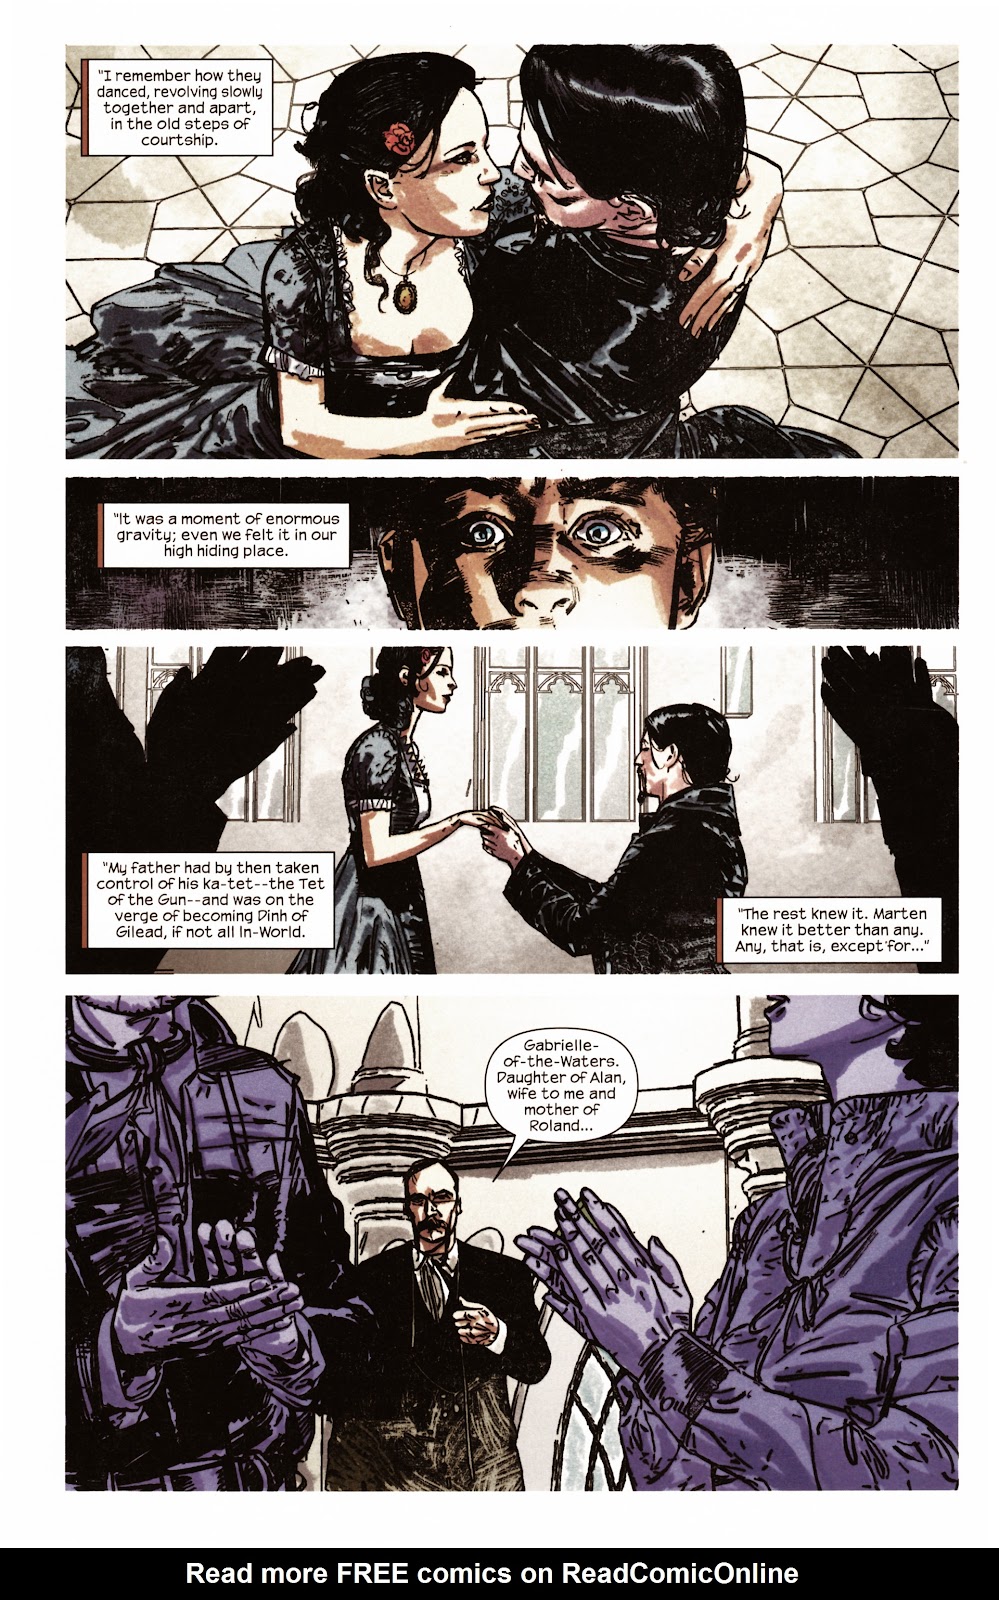 Dark Tower: The Gunslinger - The Man in Black issue 2 - Page 19